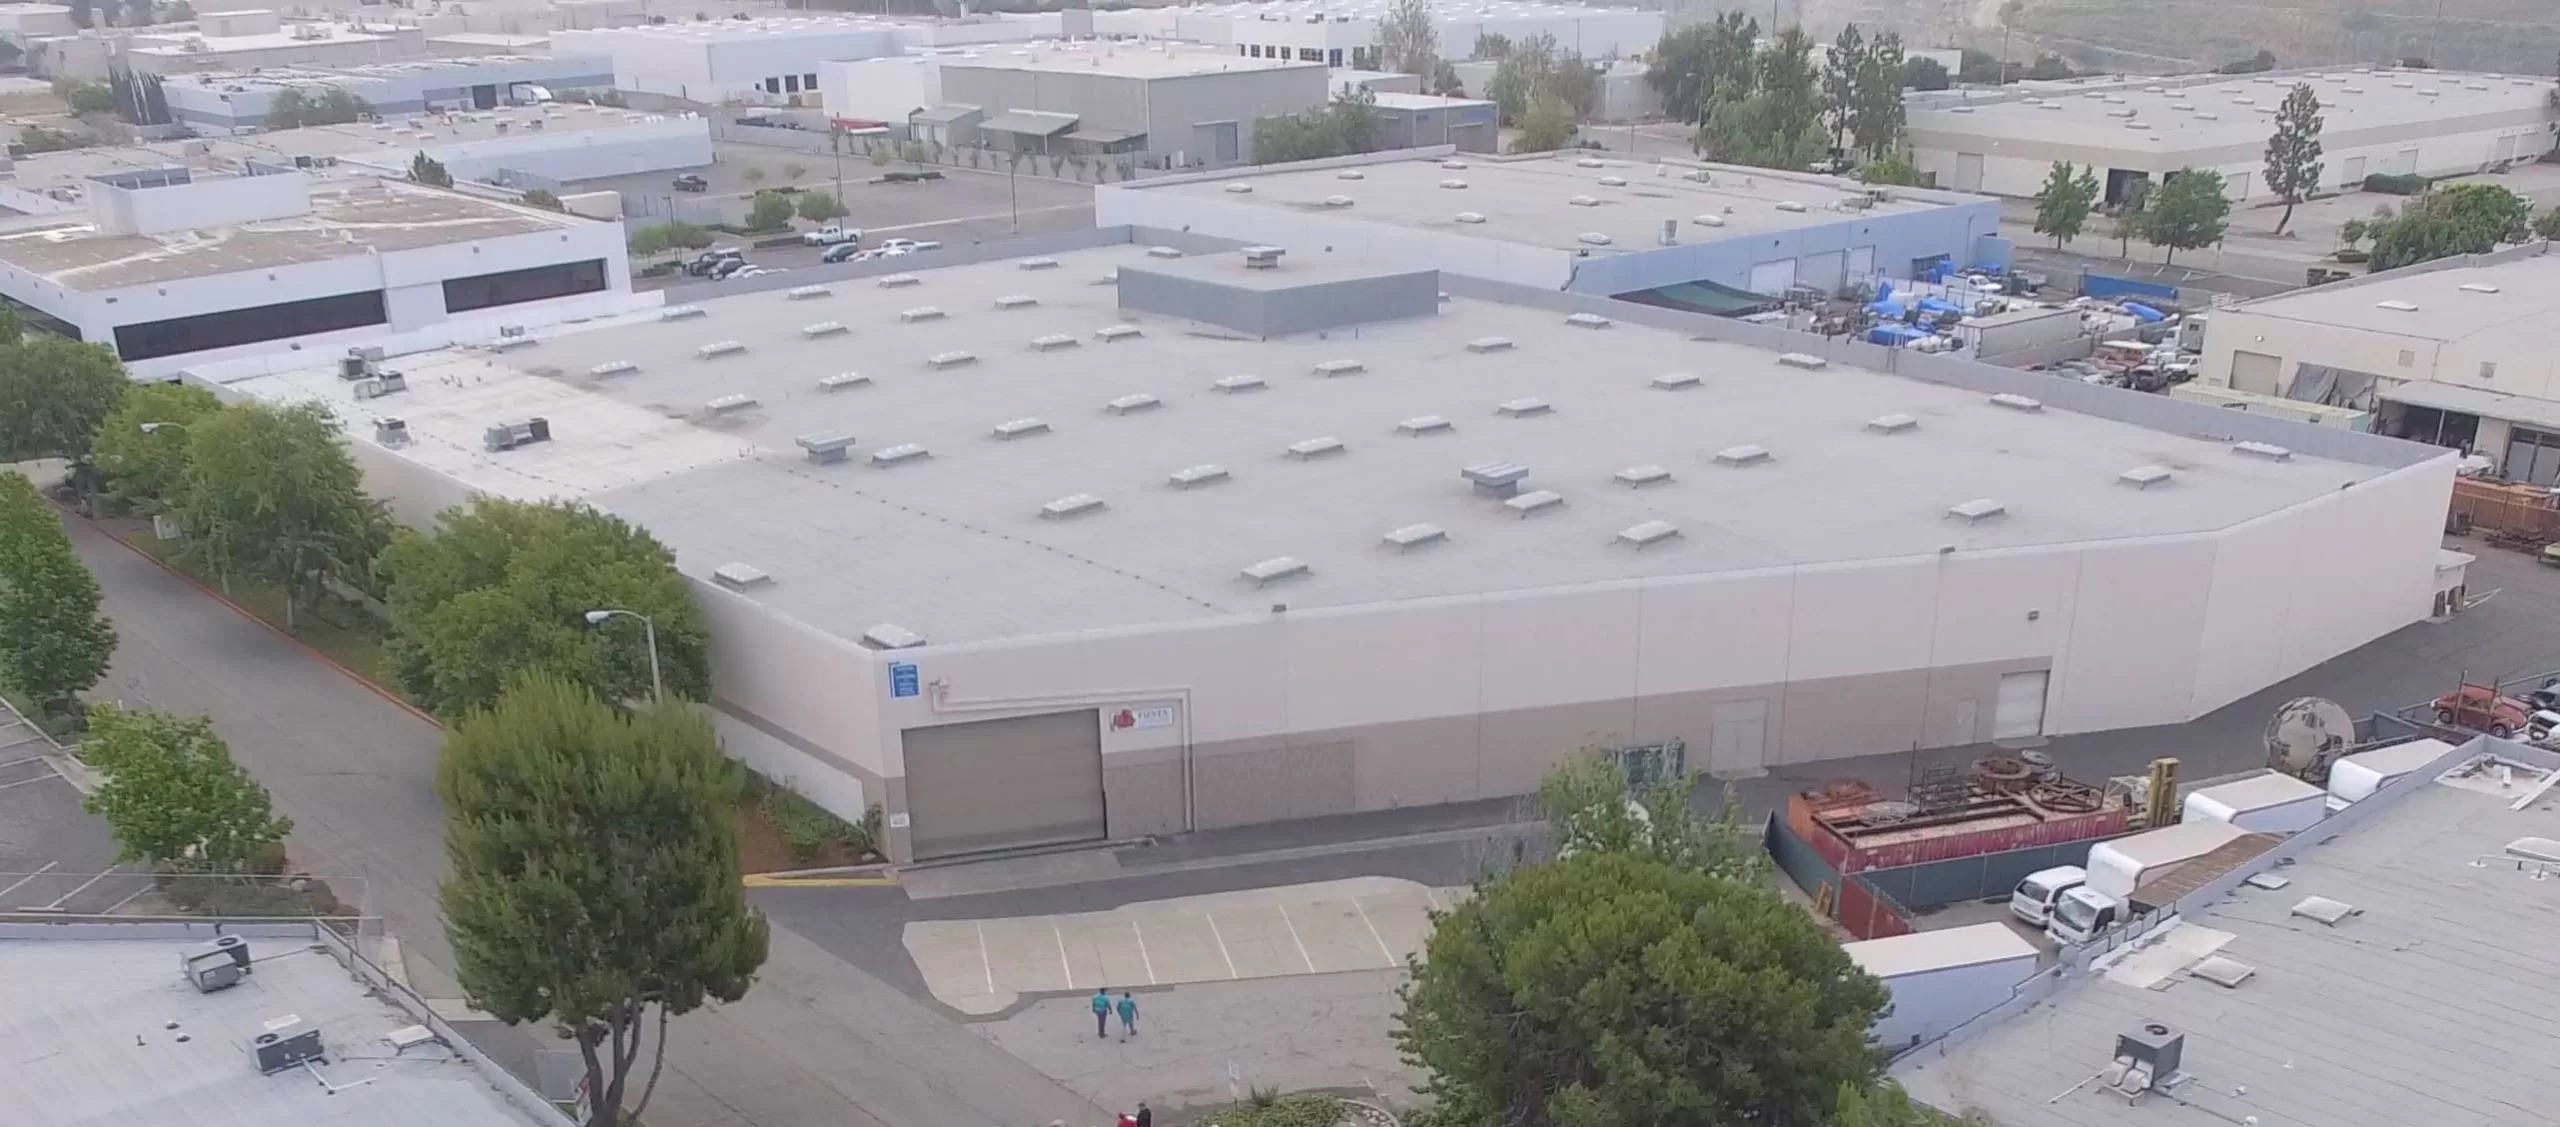 Aerial view of a large industrial warehouse with multiple air vents on the roof